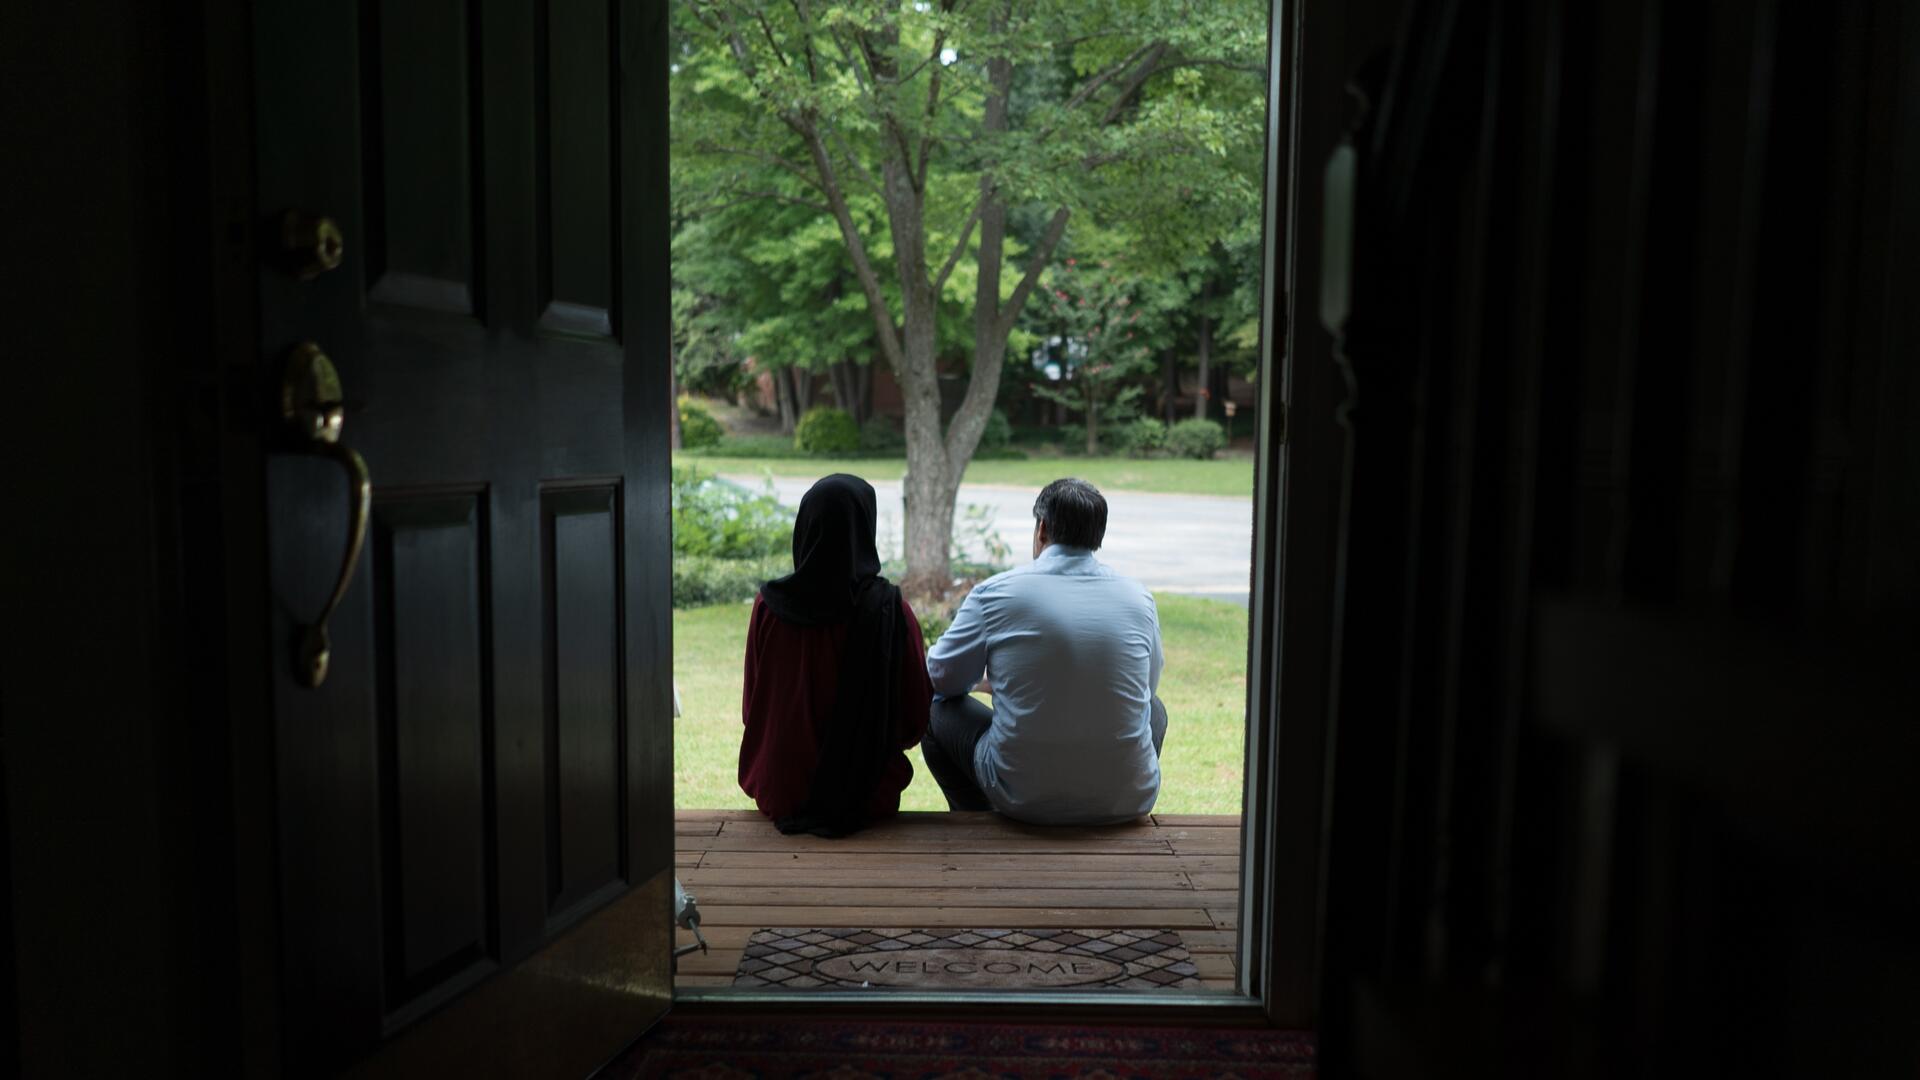 Afghan refugees Fatima, 19, and her father Abdul, 52, sit on the wooden front steps of a Virginia house looking out at the trees in the yard  